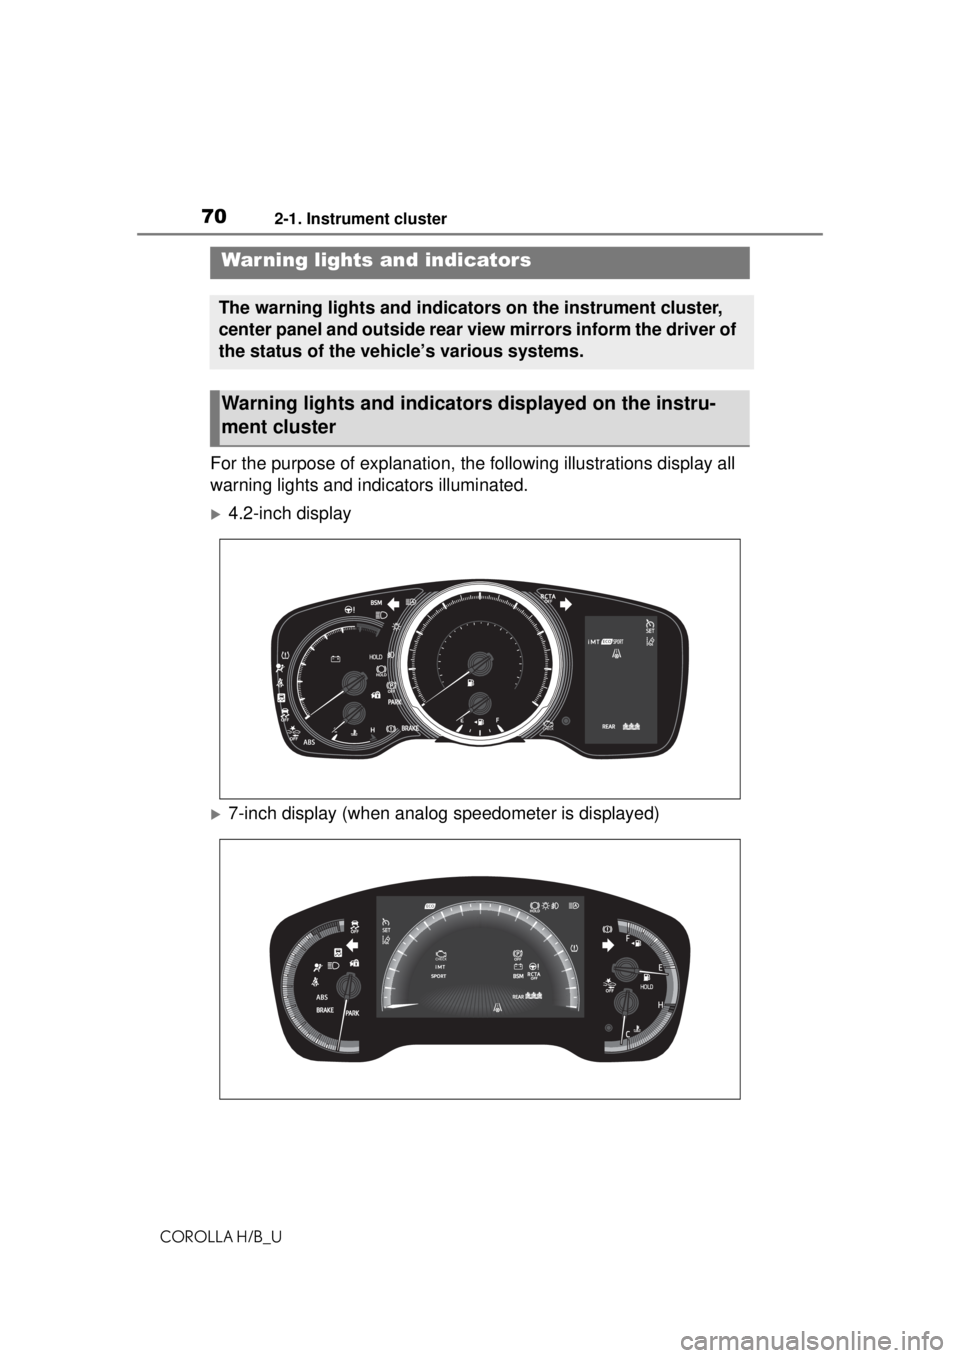 TOYOTA COROLLA HATCHBACK 2021  Owners Manual (in English) 702-1. Instrument cluster
COROLLA H/B_U
2-1.Instrument cluster
For the purpose of explanation, the following illustrations display all 
warning lights and indicators illuminated.
4.2-inch display
�